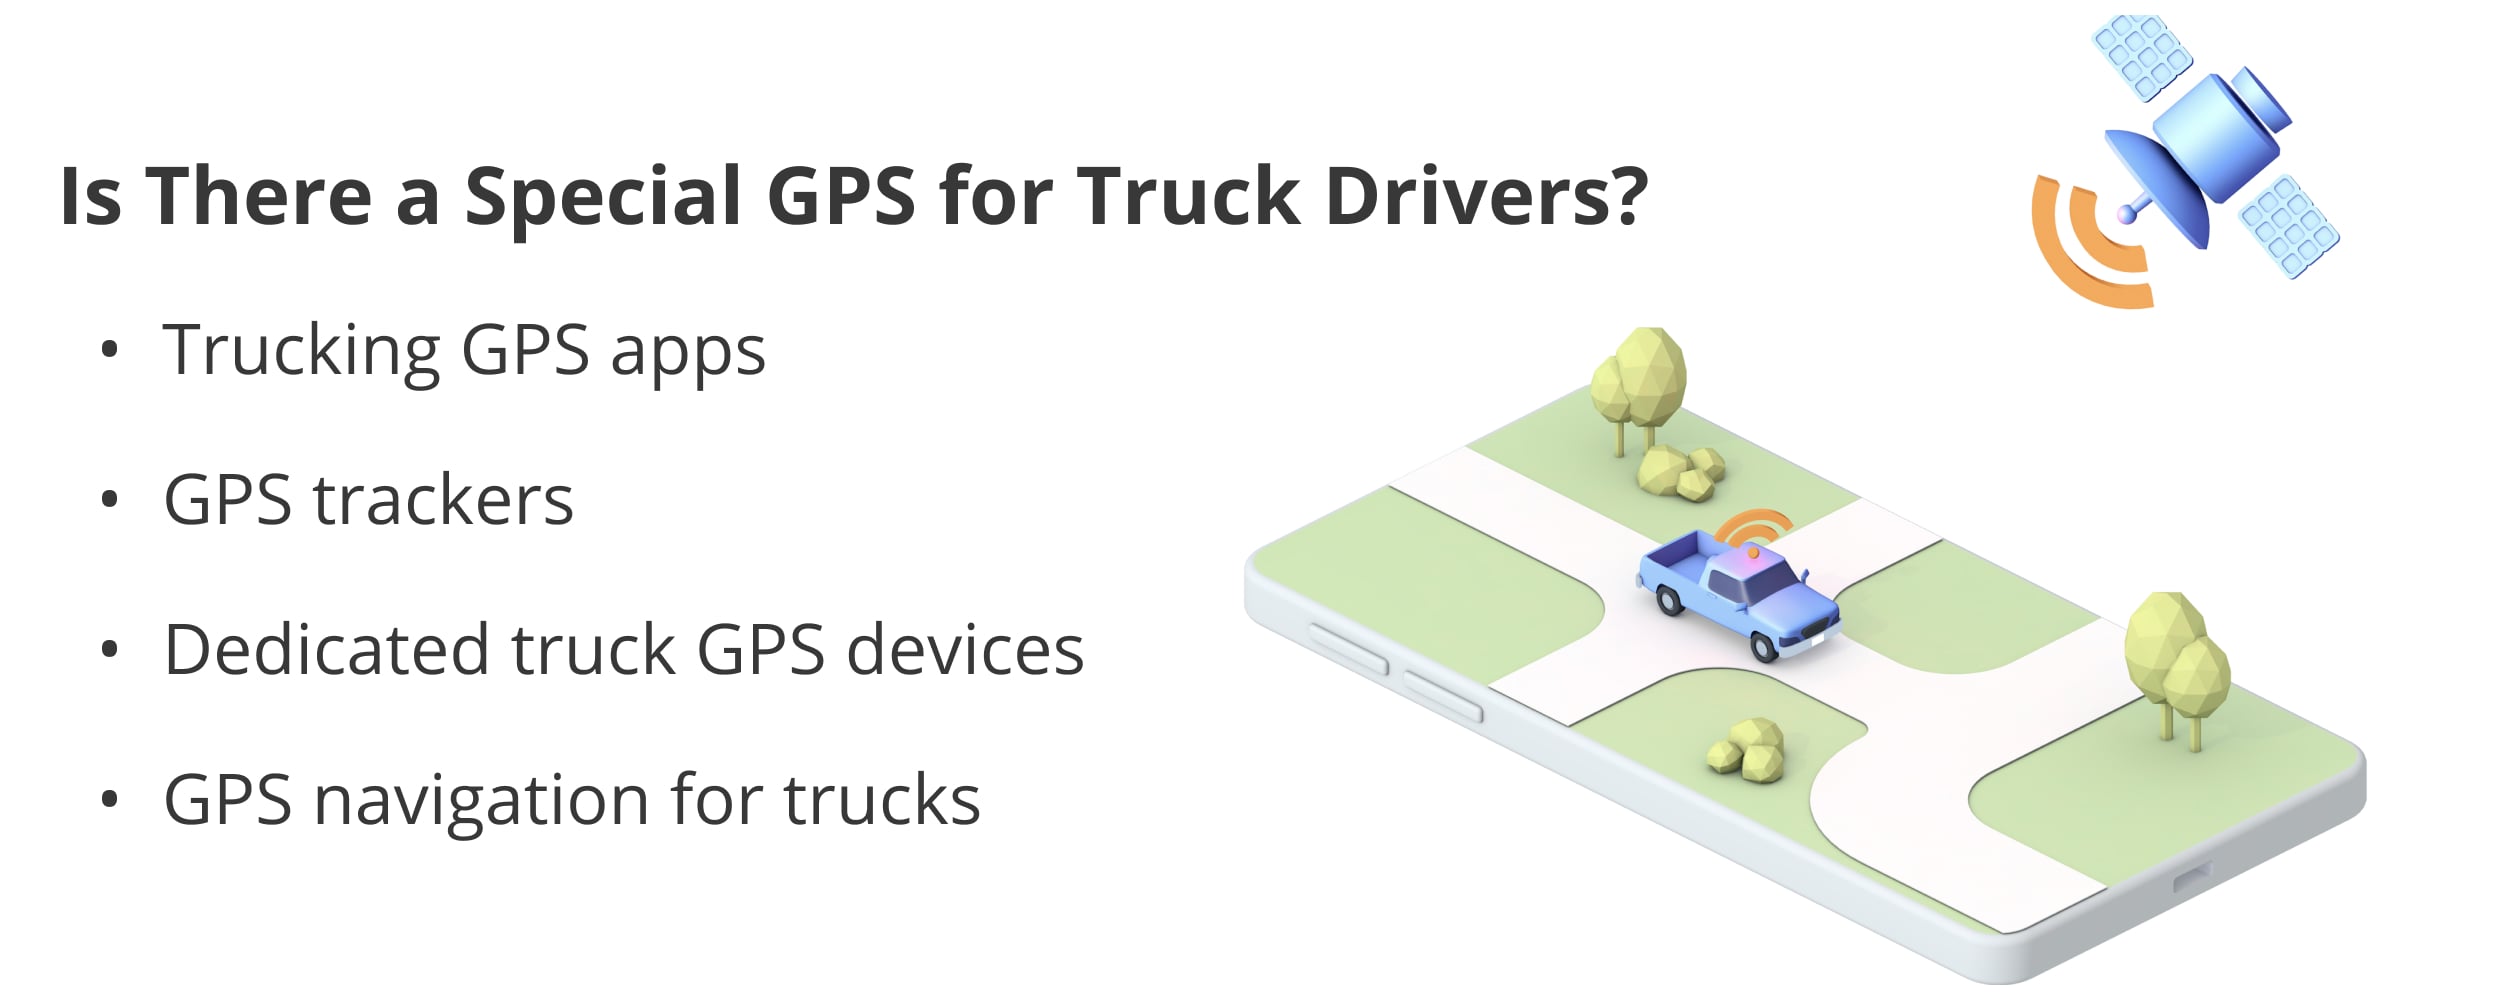 Examples of truck GPS navigation features developed specifically for truck drivers.